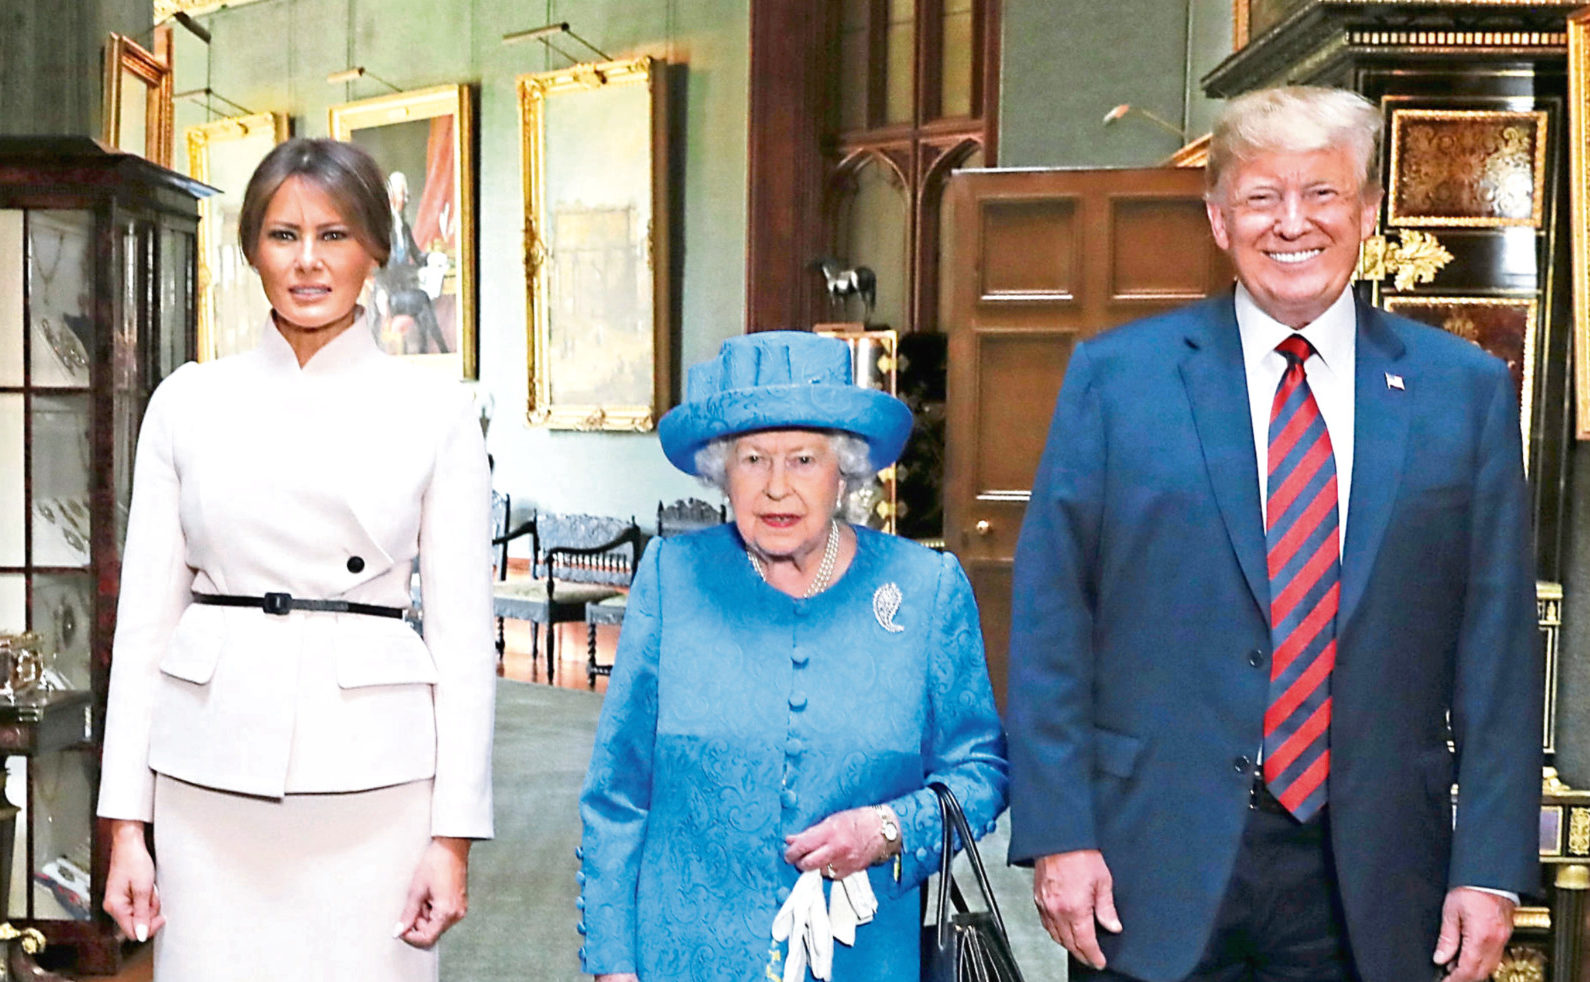 Queen Elizabeth II stands with US President Donald Trump and his wife, Melania, in the Grand Corridor during their visit to Windsor Castle in Berkshire last year